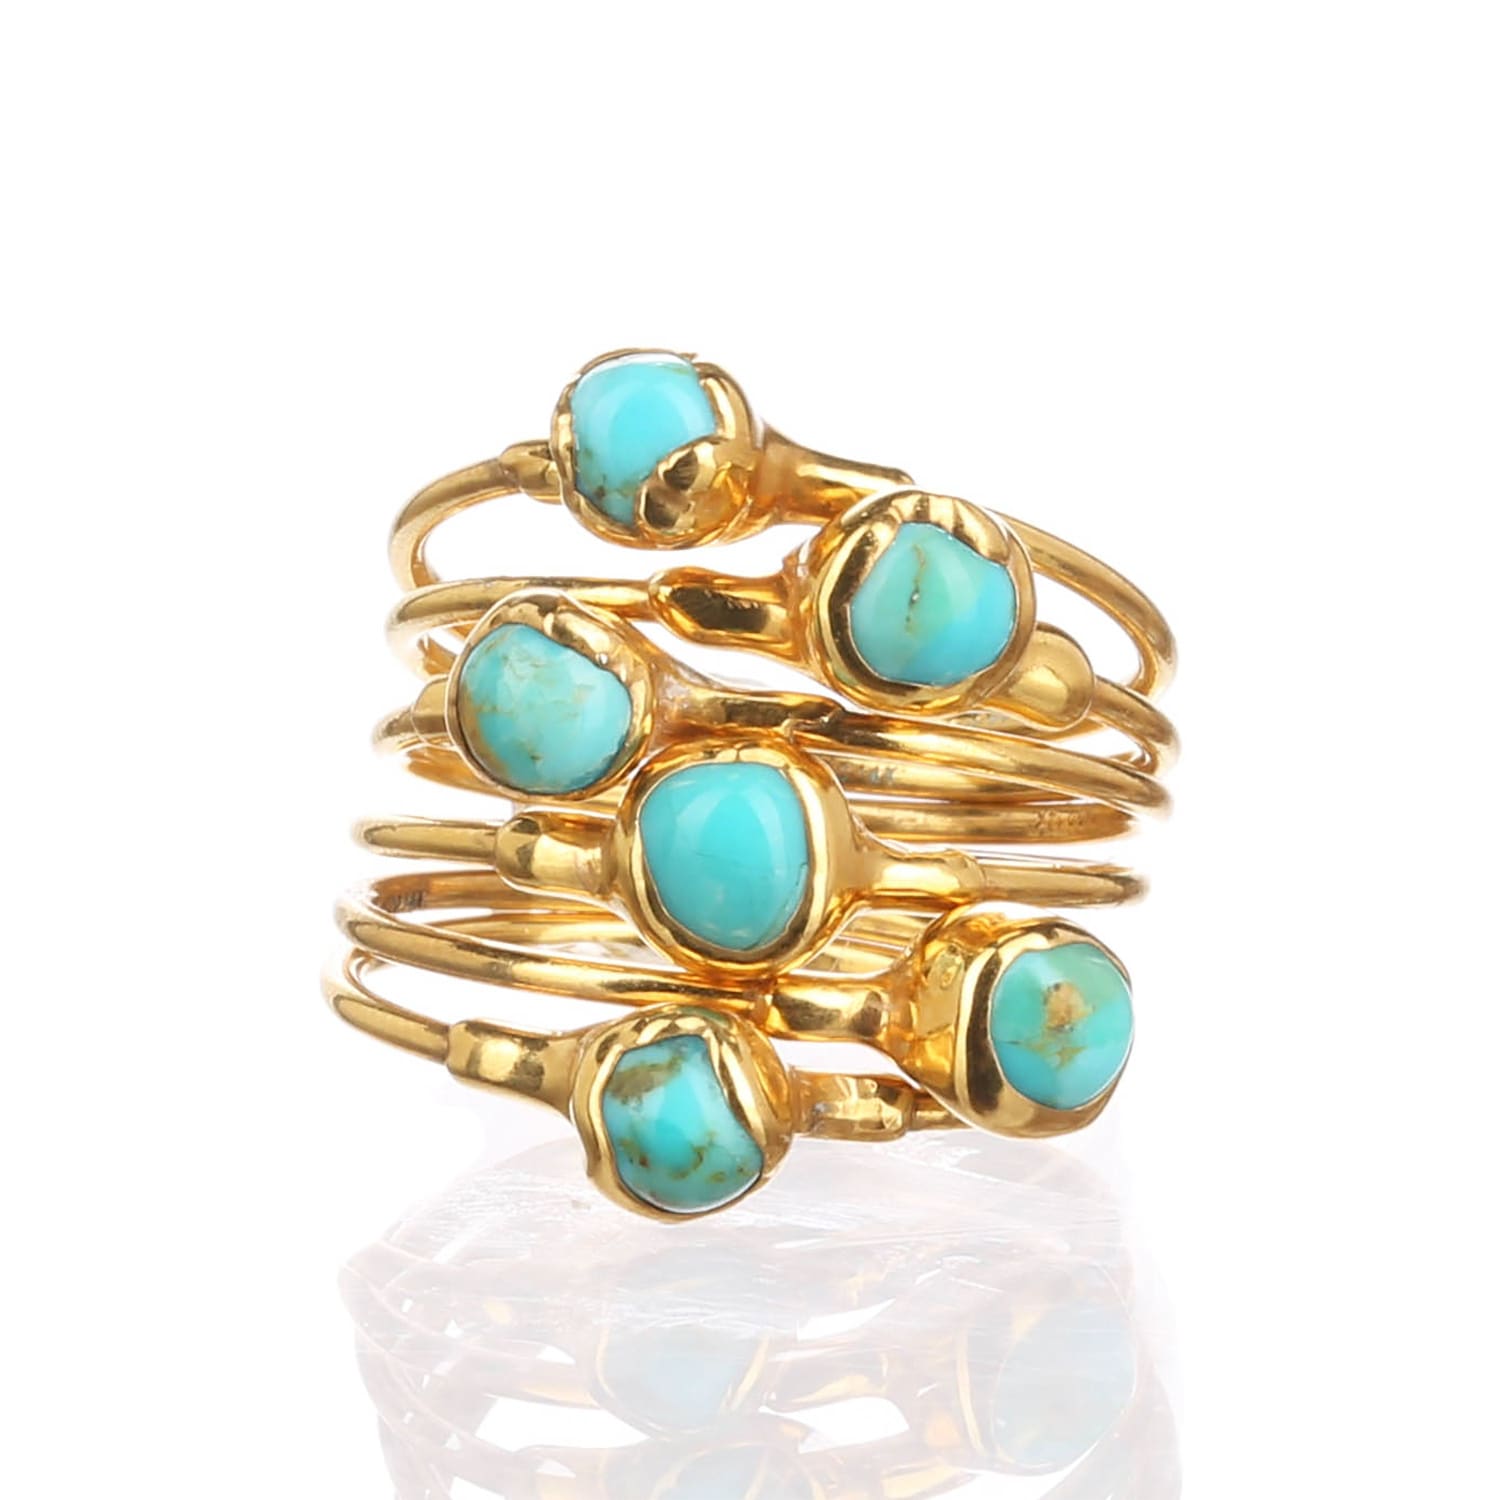 Dainty Raw Turquoise Ring for Stacking Gemstone Jewelry